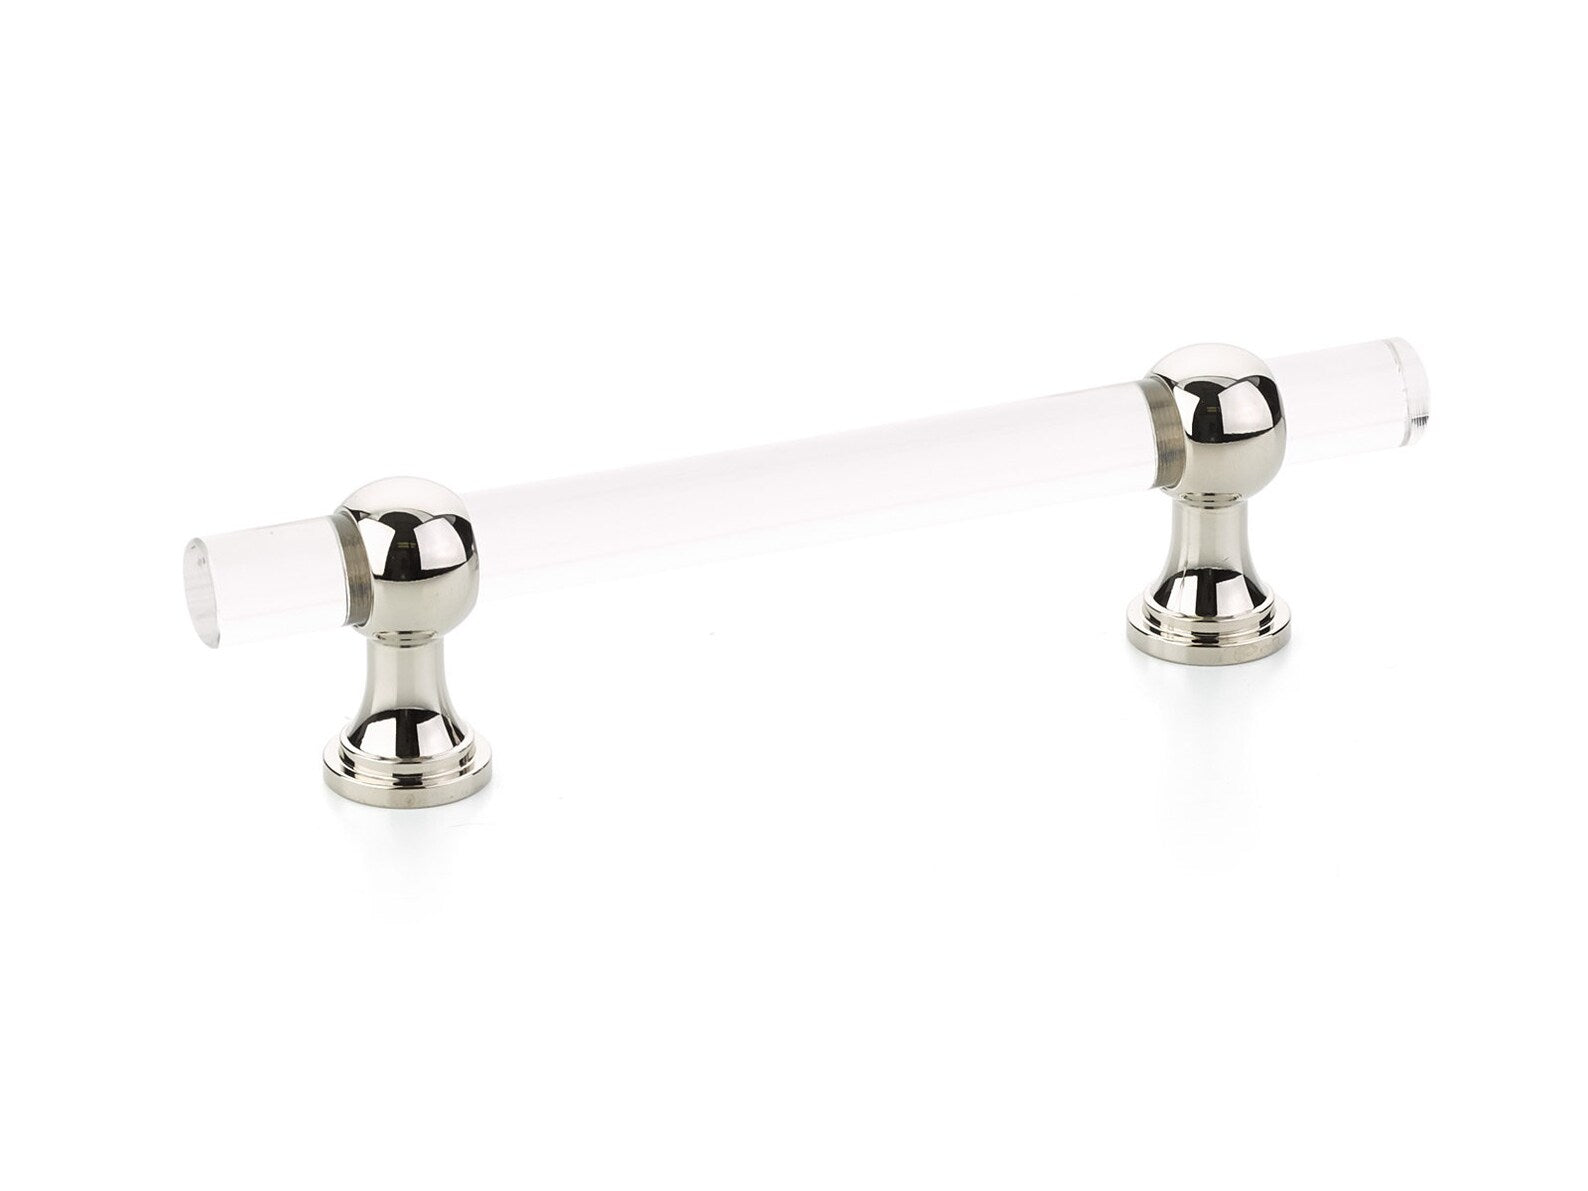 Polished Nickel and Lucite "Gleam" Cabinet Knobs and Drawer Pulls (Adjustable) - Forge Hardware Studio